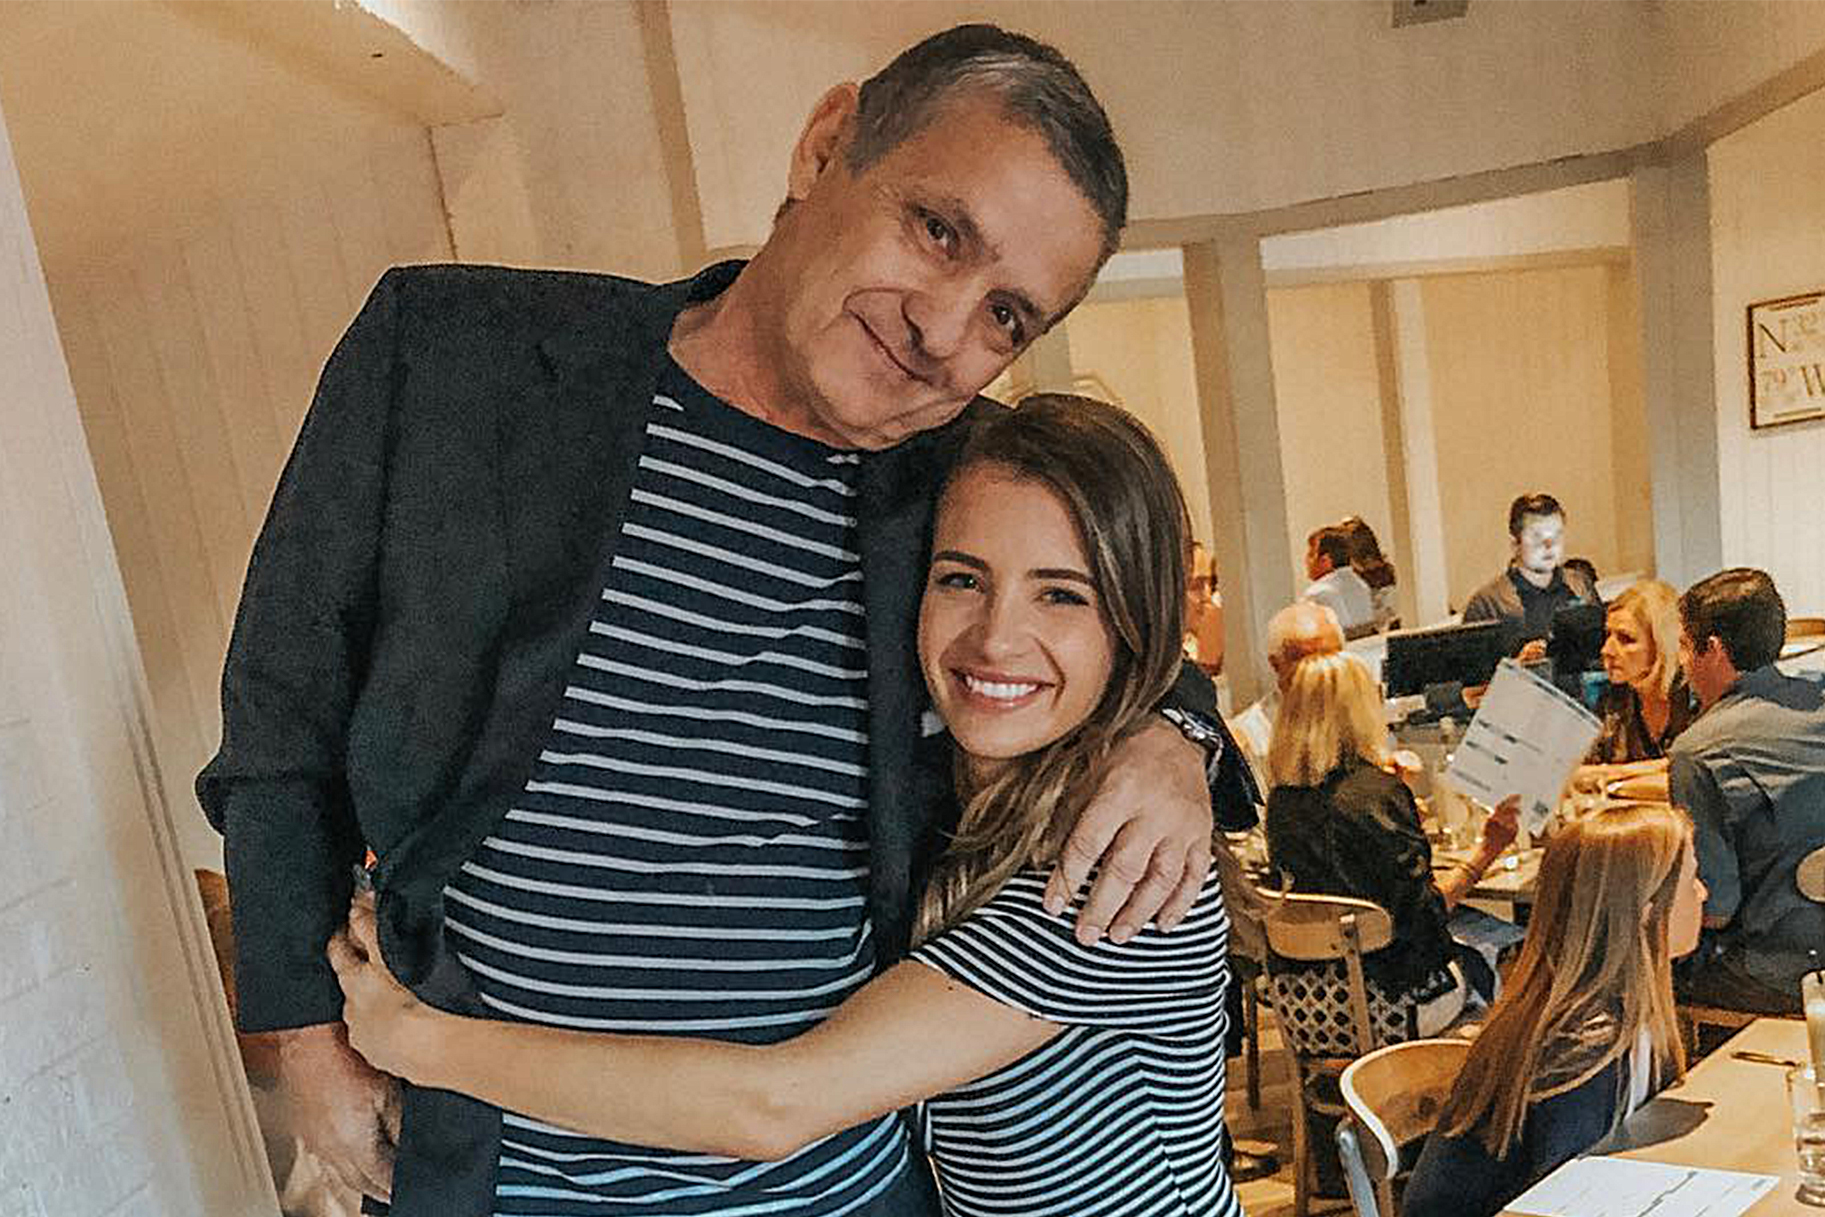 Naomie Olindo's Father Has Passed Away: "There Aren’t Really Words for This Pain" - www.bravotv.com